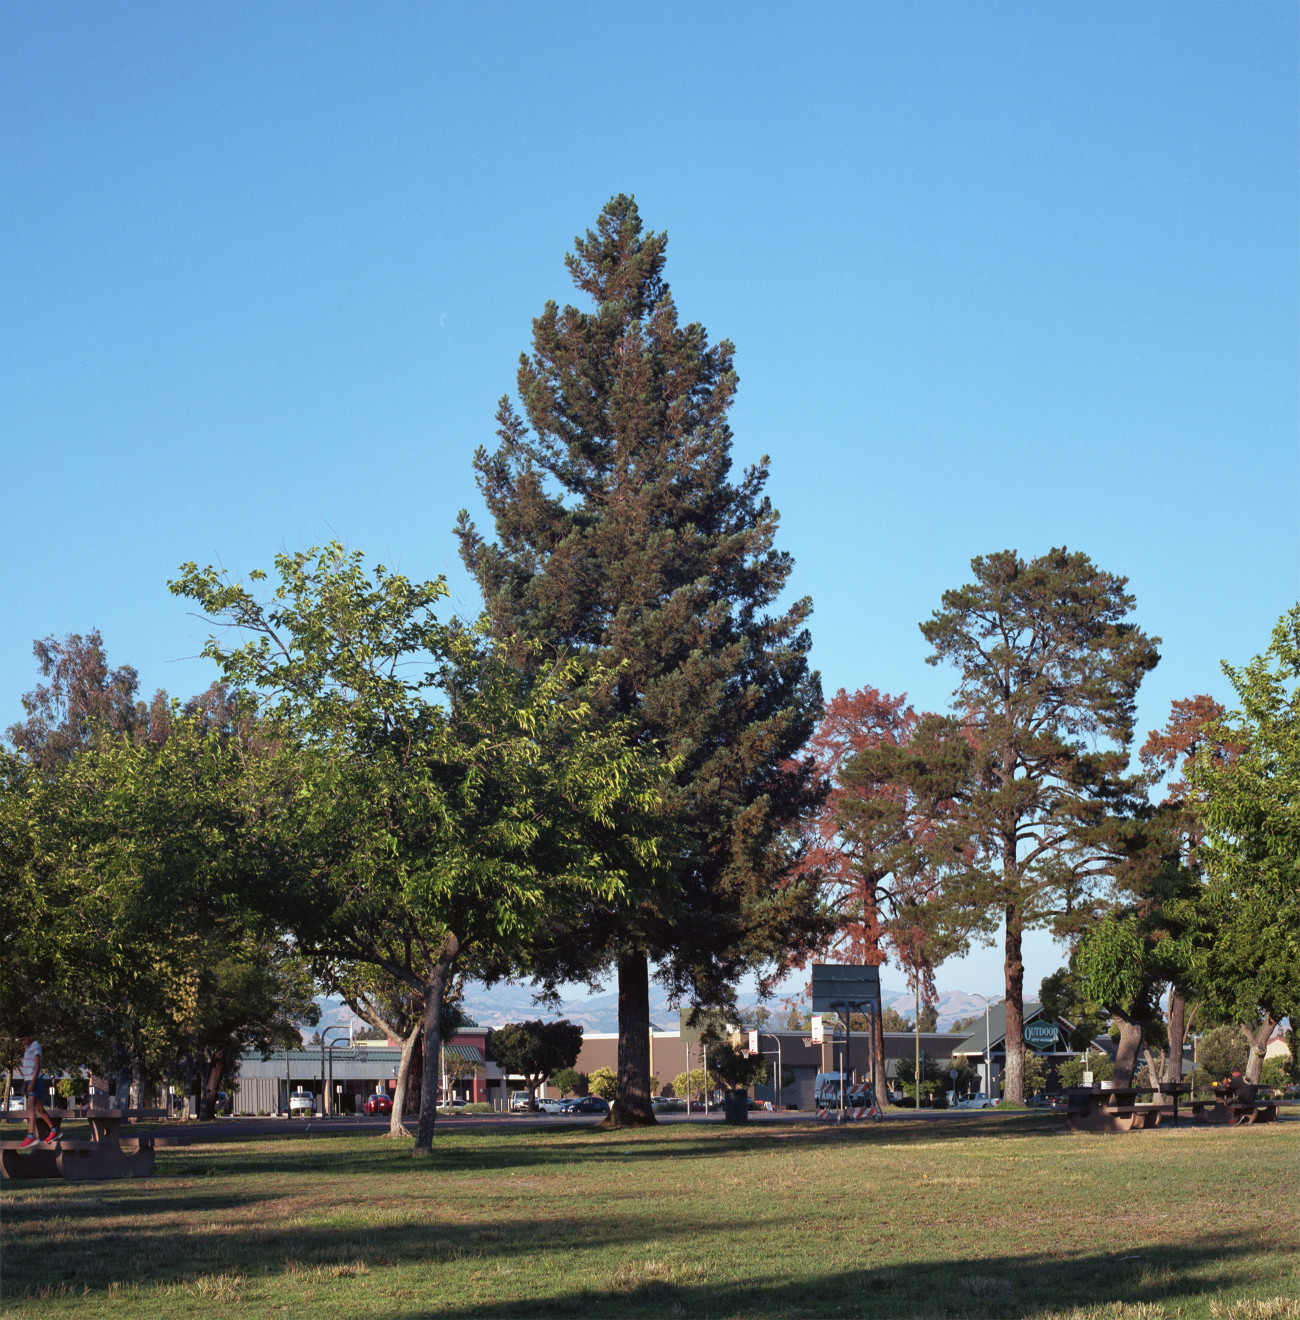 Stand of trees in a park on Meridian Avenue, San Jose